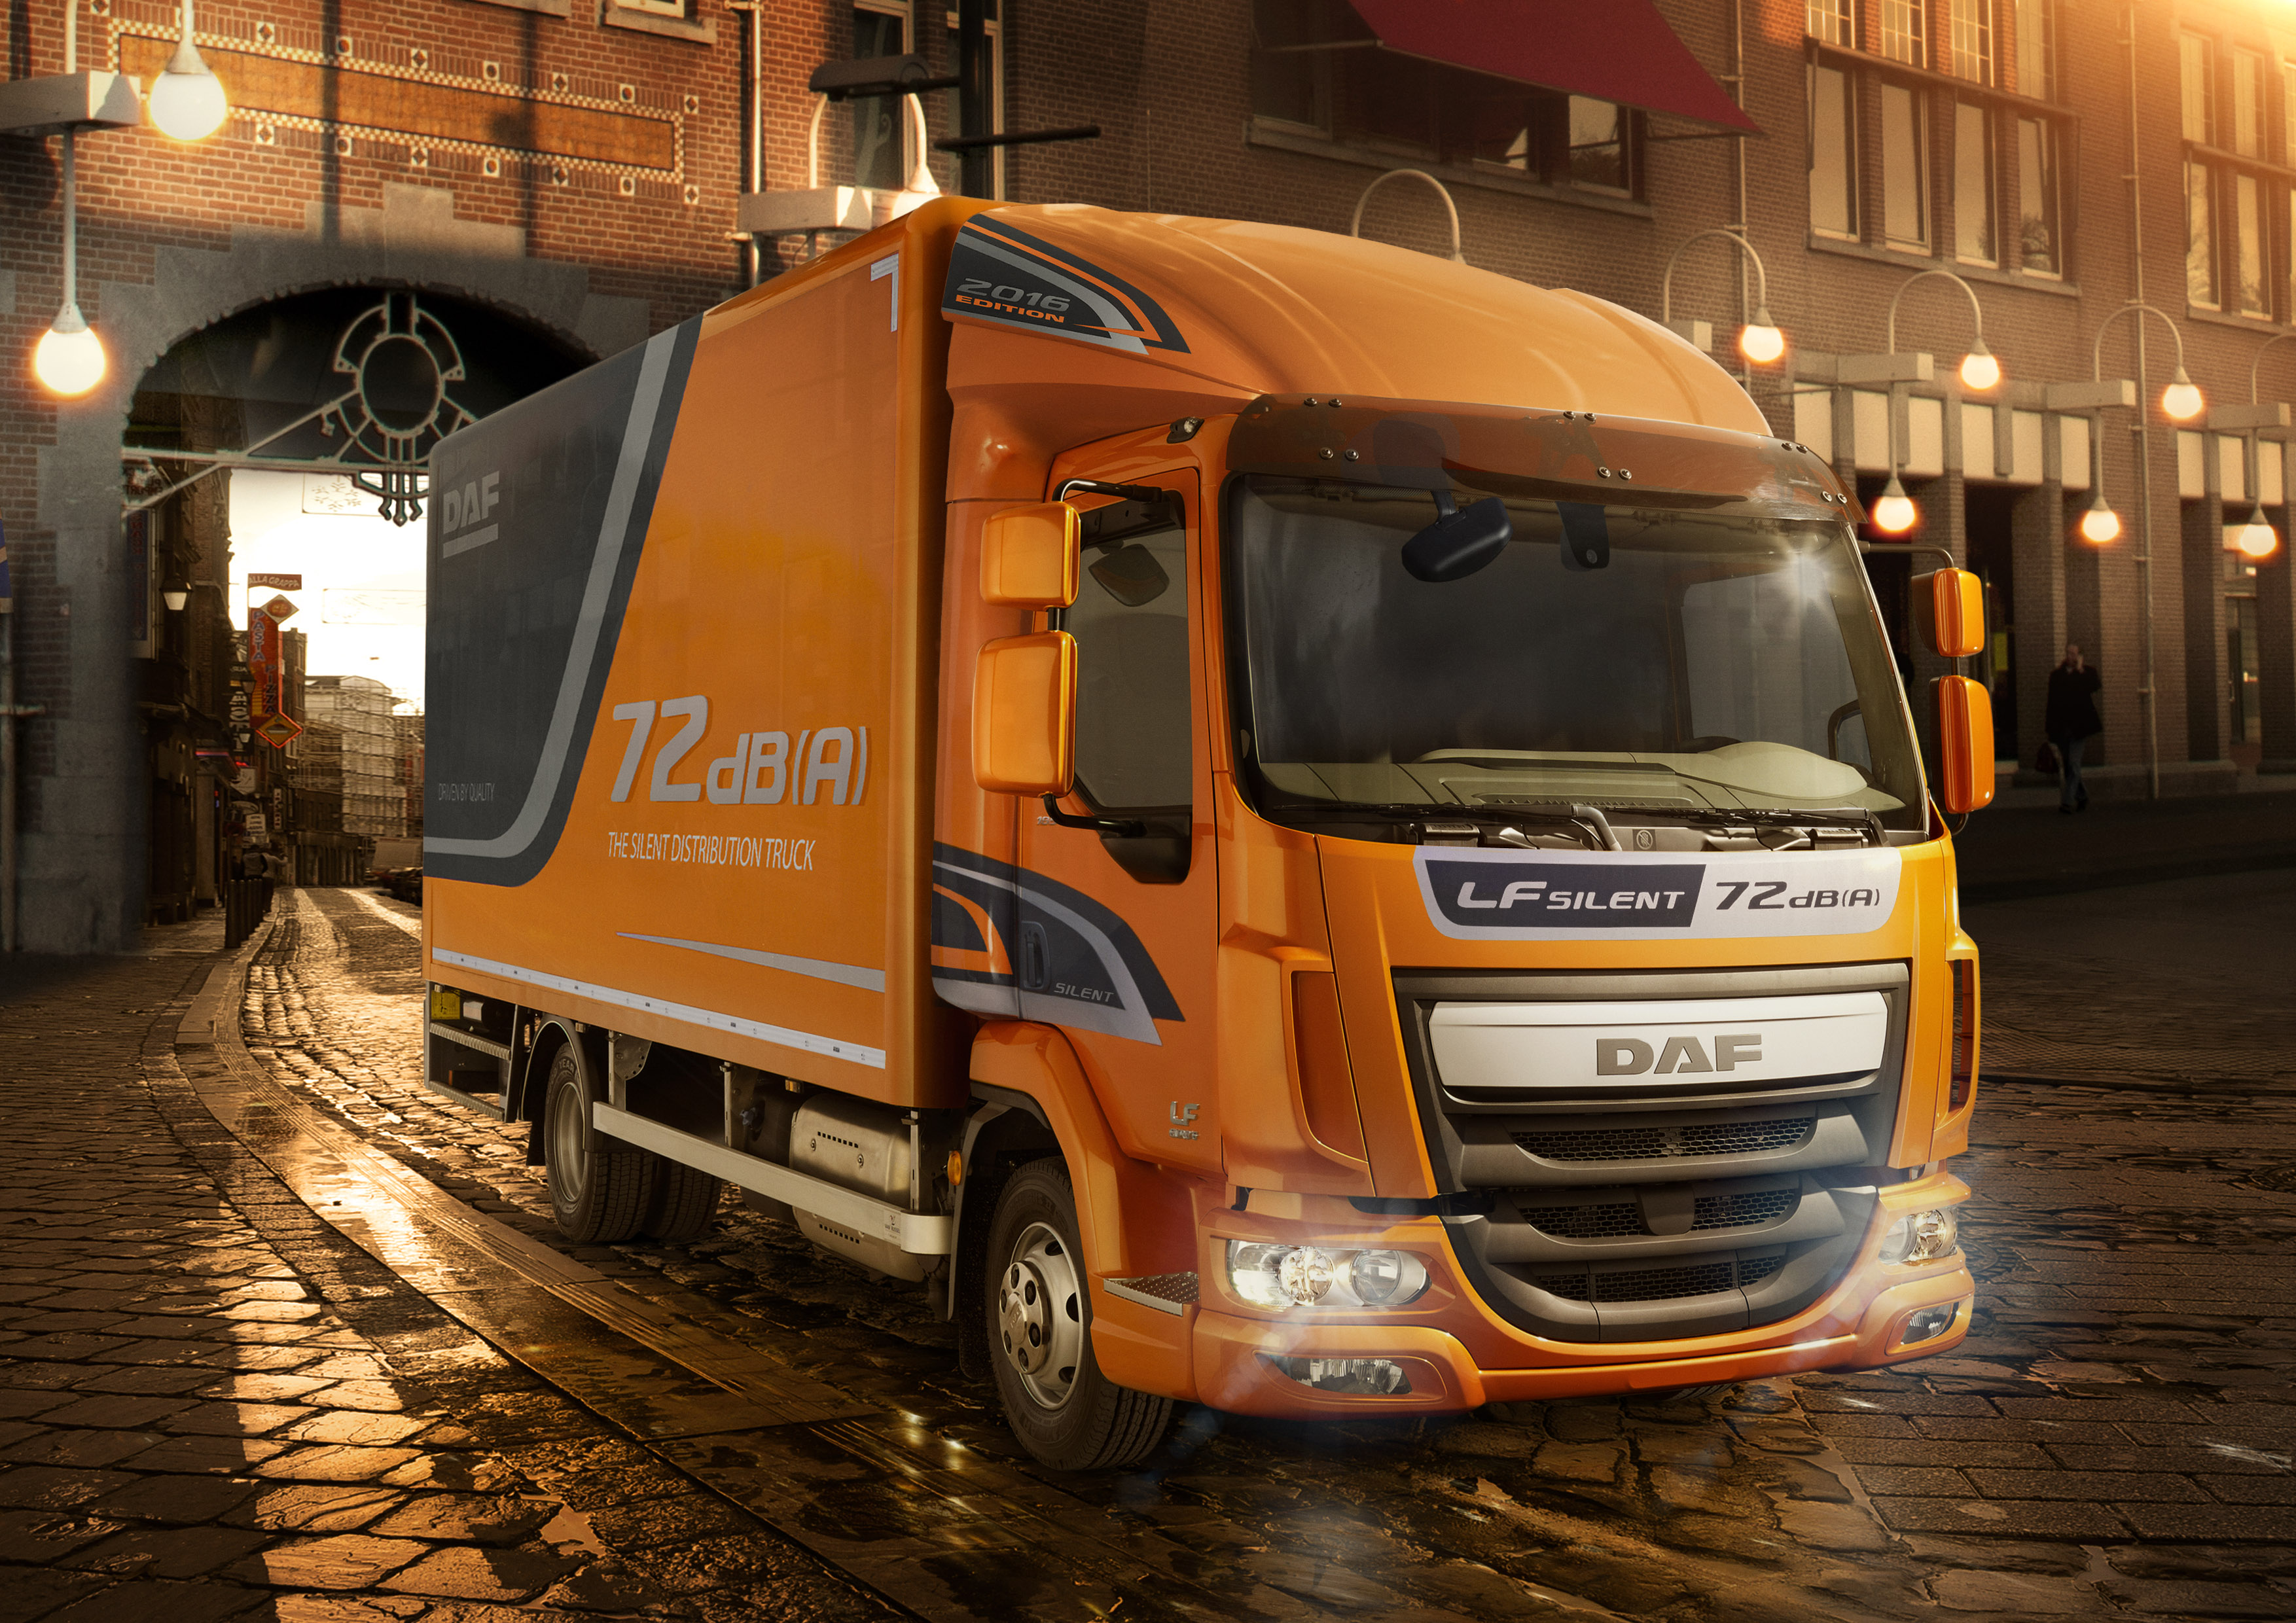 Daf Now Also Introduces Extra Quiet Lf Distribution Truck Daf Trucks Nv